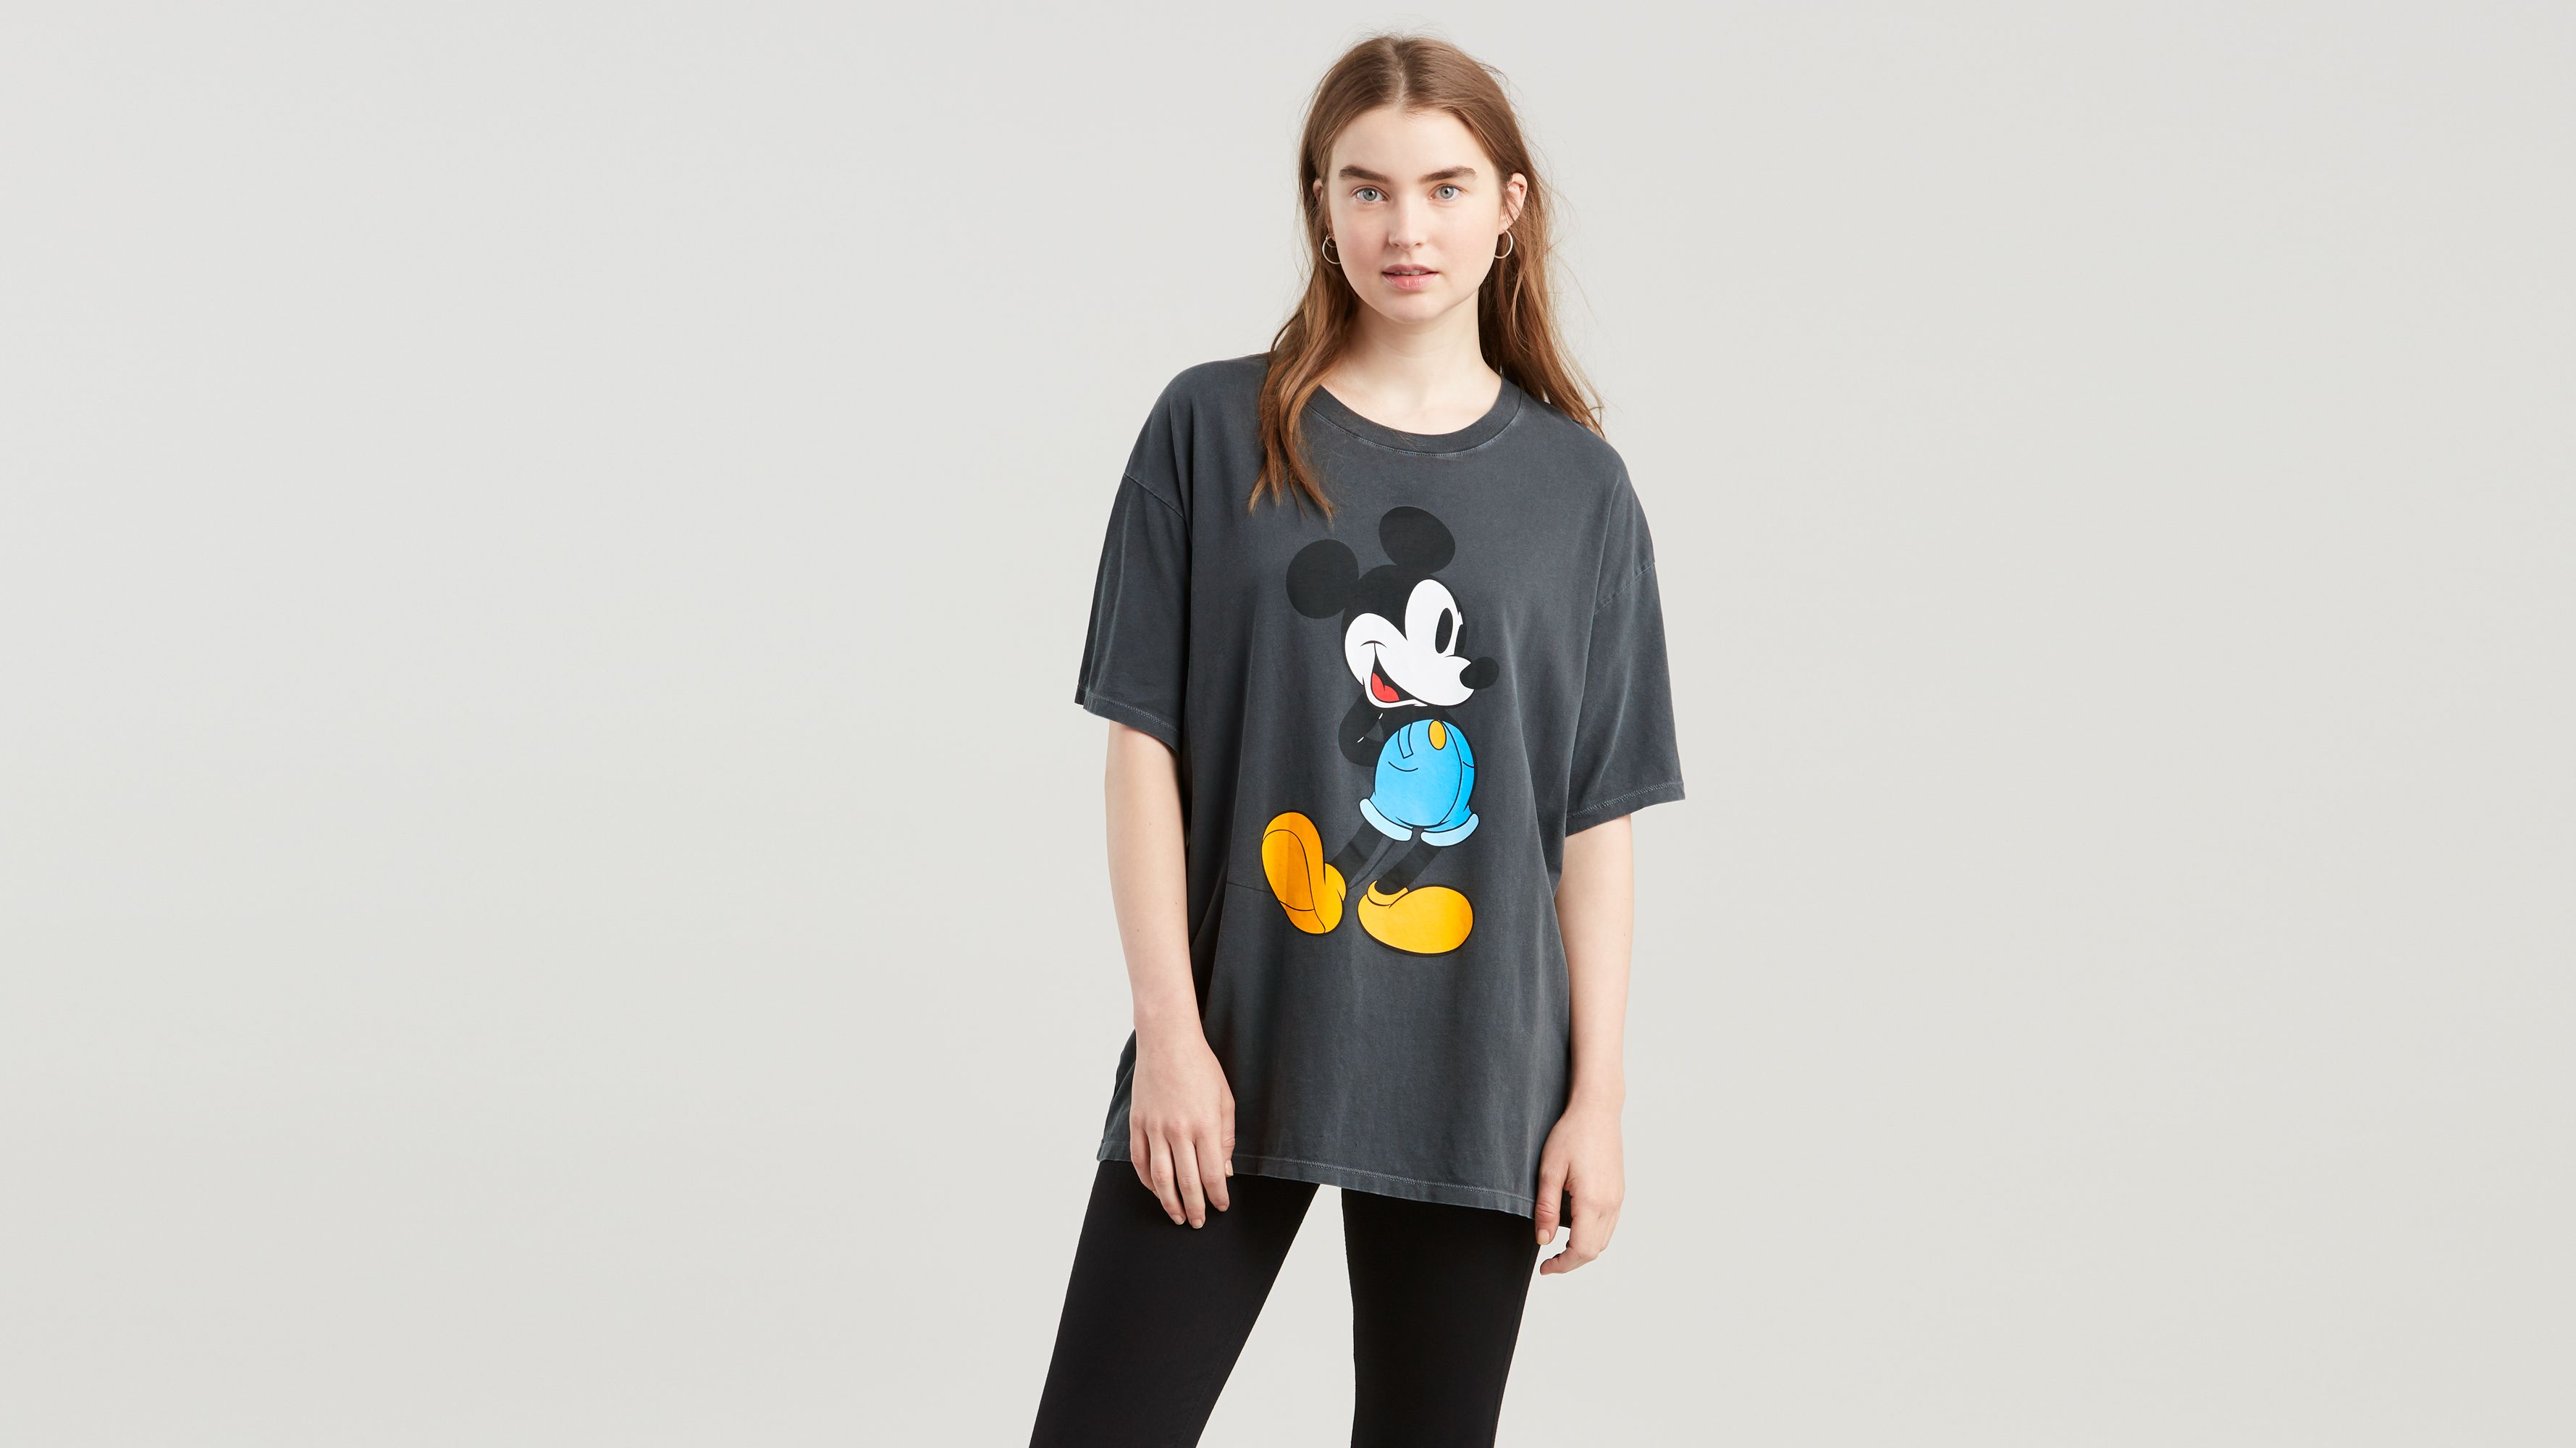 levi's mickey mouse t shirt